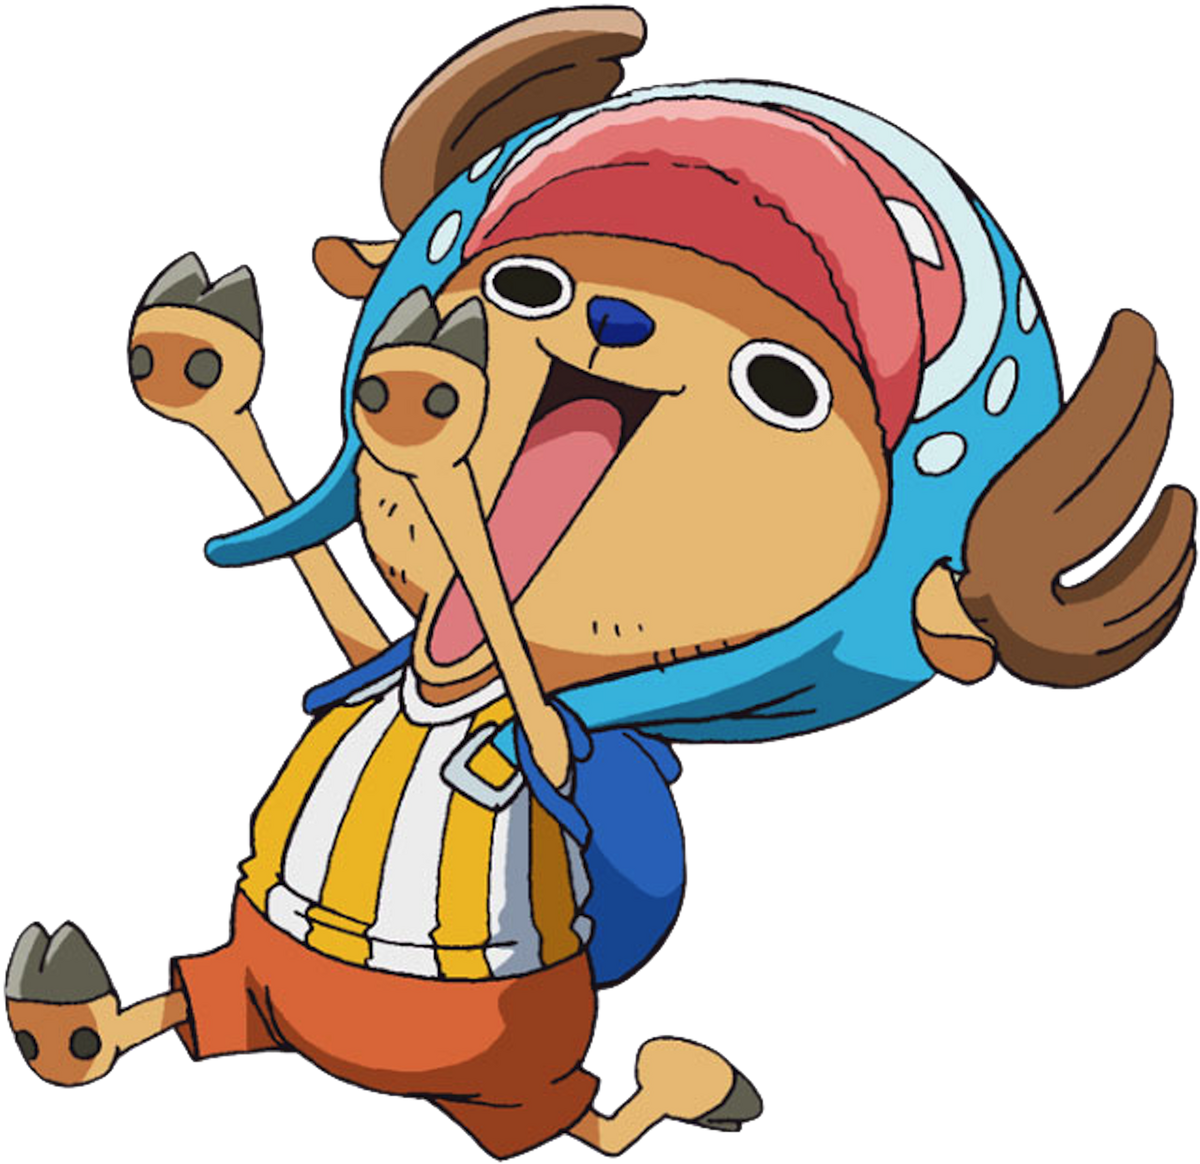 Tony Tony Chopper Voice - One Piece: Episode of Luffy: Adventure on Hand  Island (TV Show) - Behind The Voice Actors